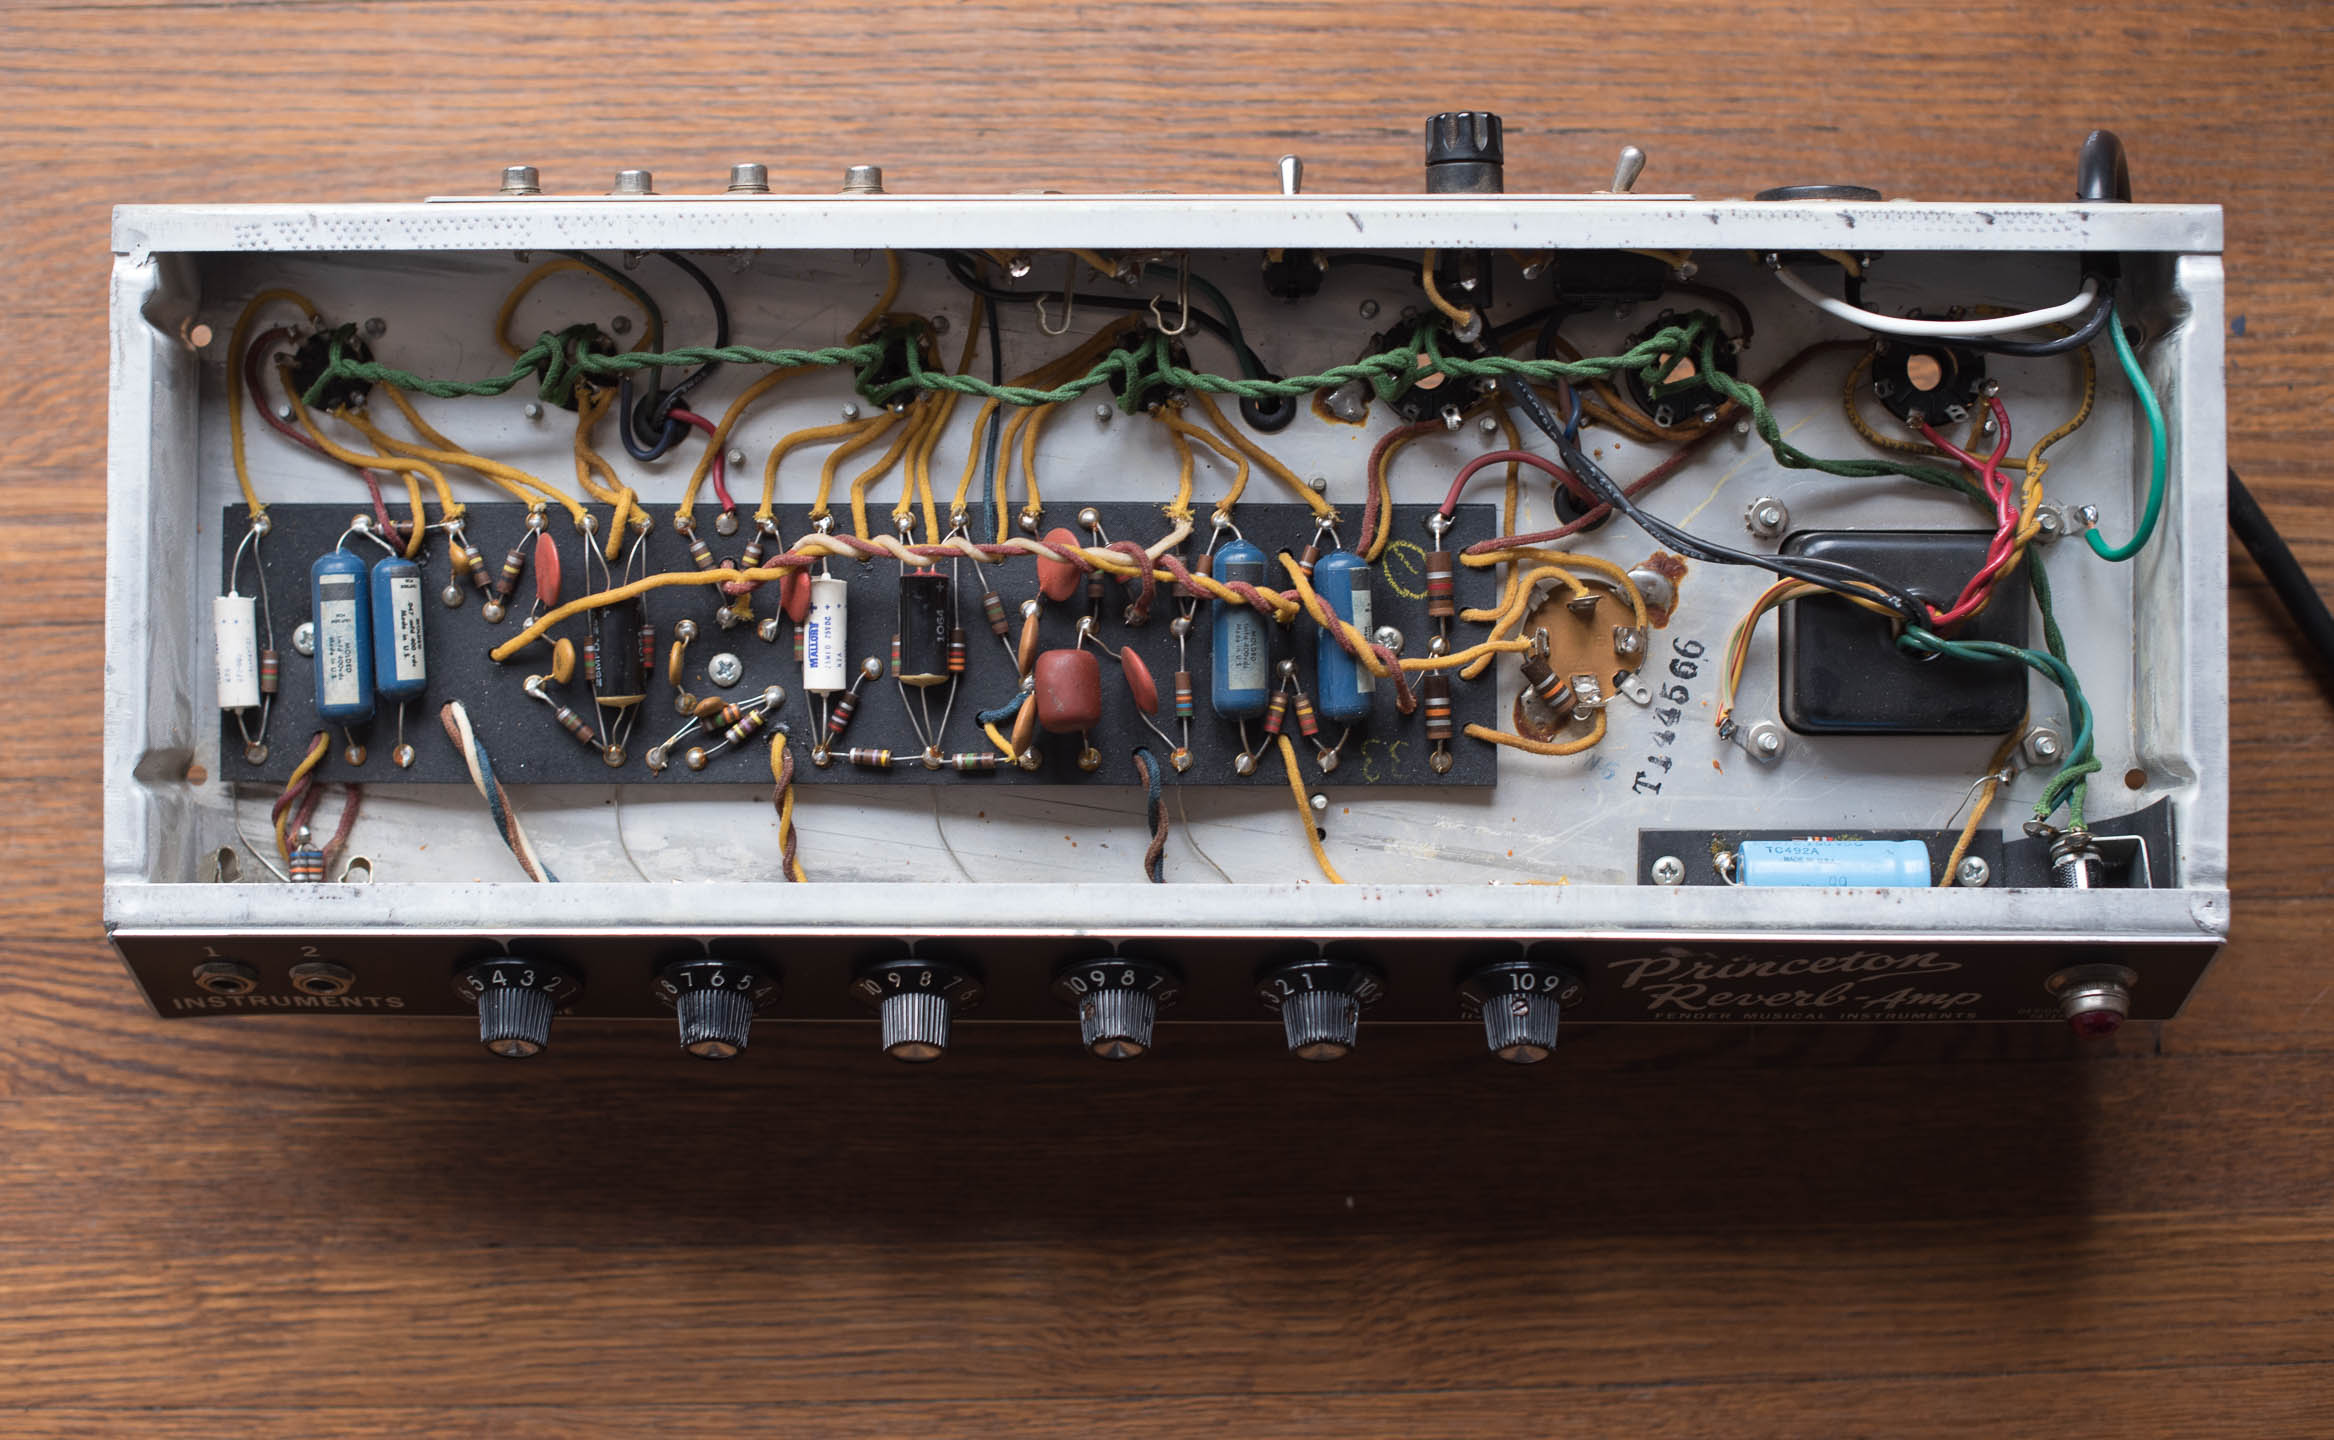 chassis, circuit board, 1966 Fender Princeton Reverb